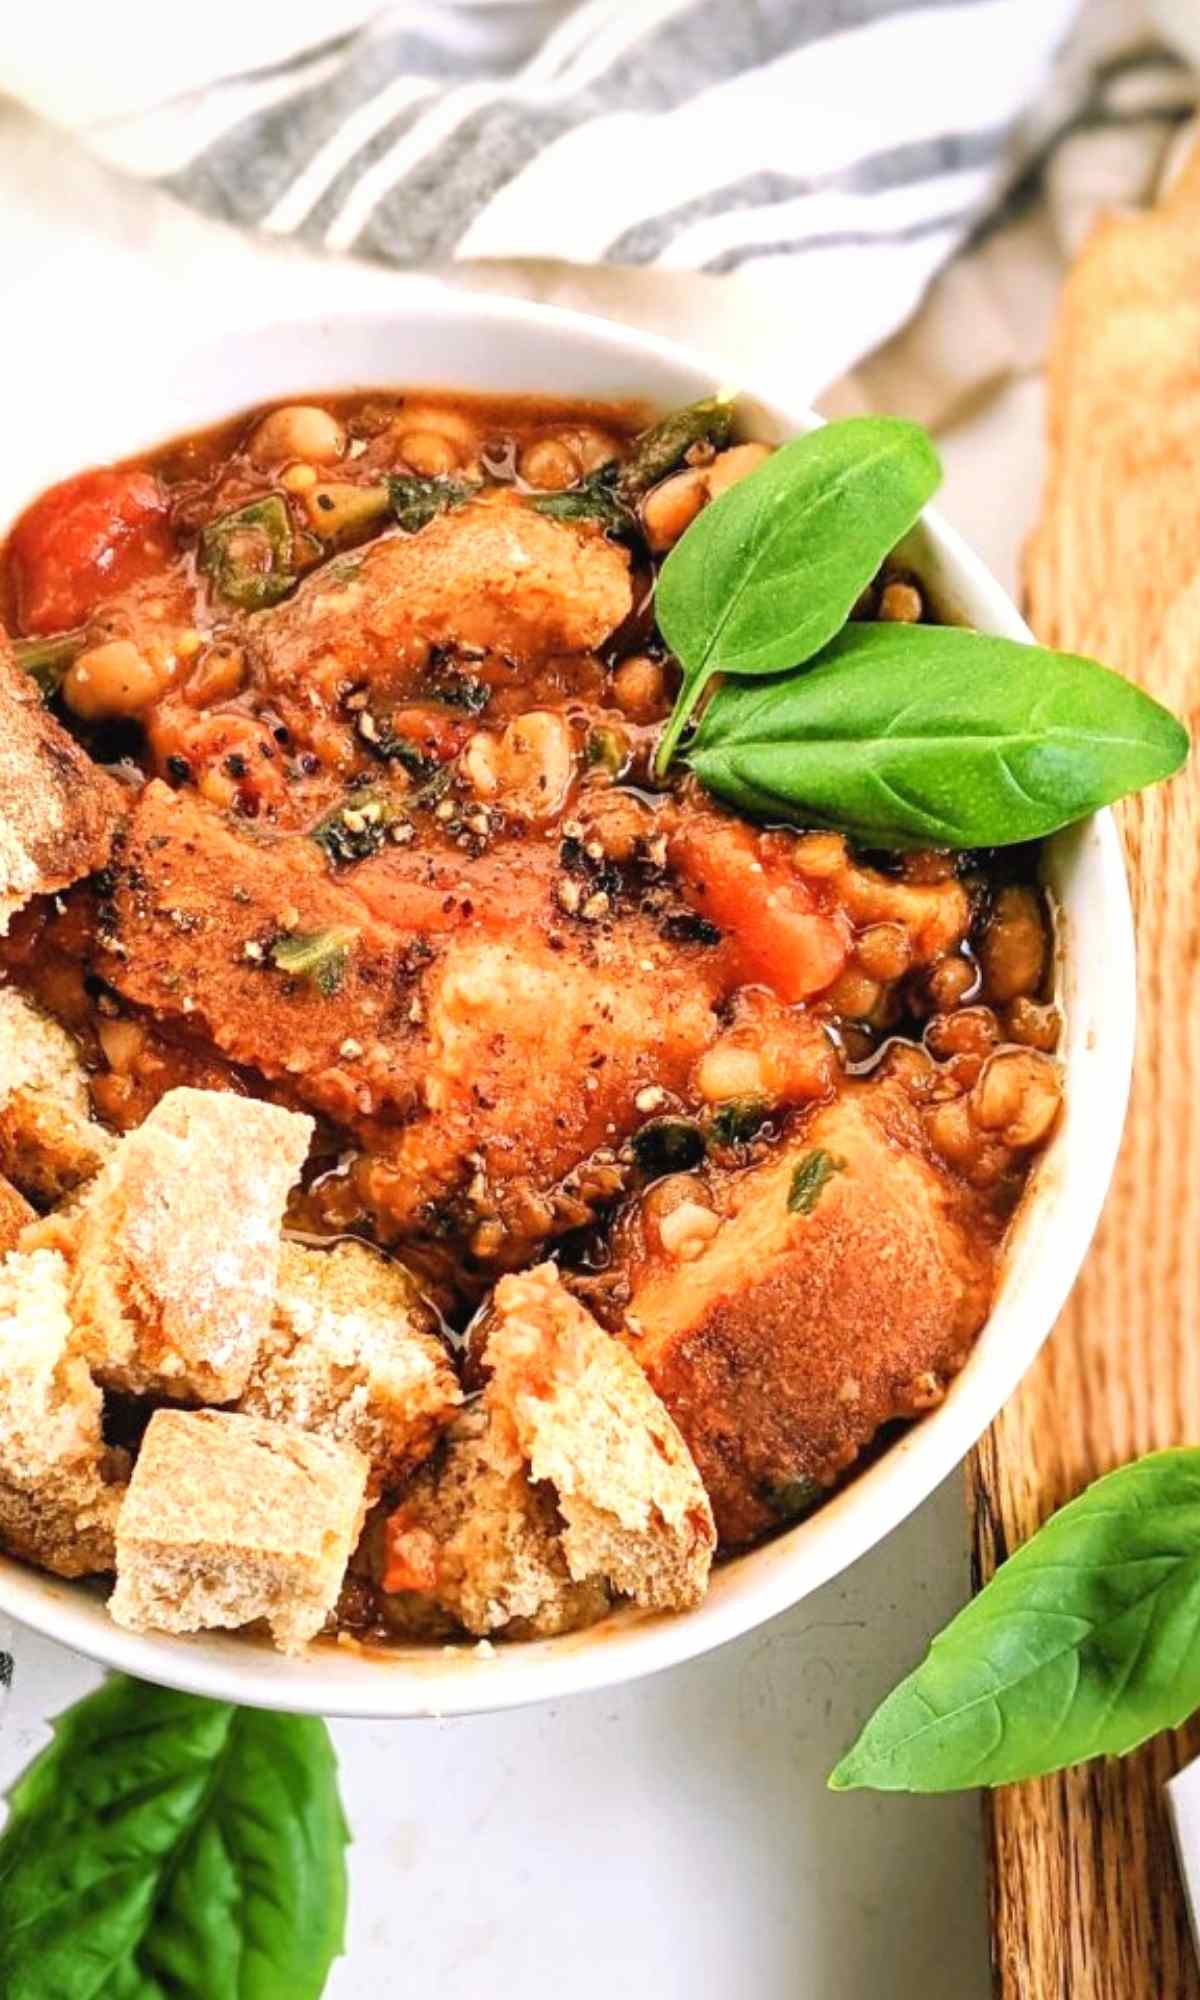 tuscan ribollita soup recipe vegan gluten free vegetarian veganuary meatless monday filling soup recipes with leftover bread stale